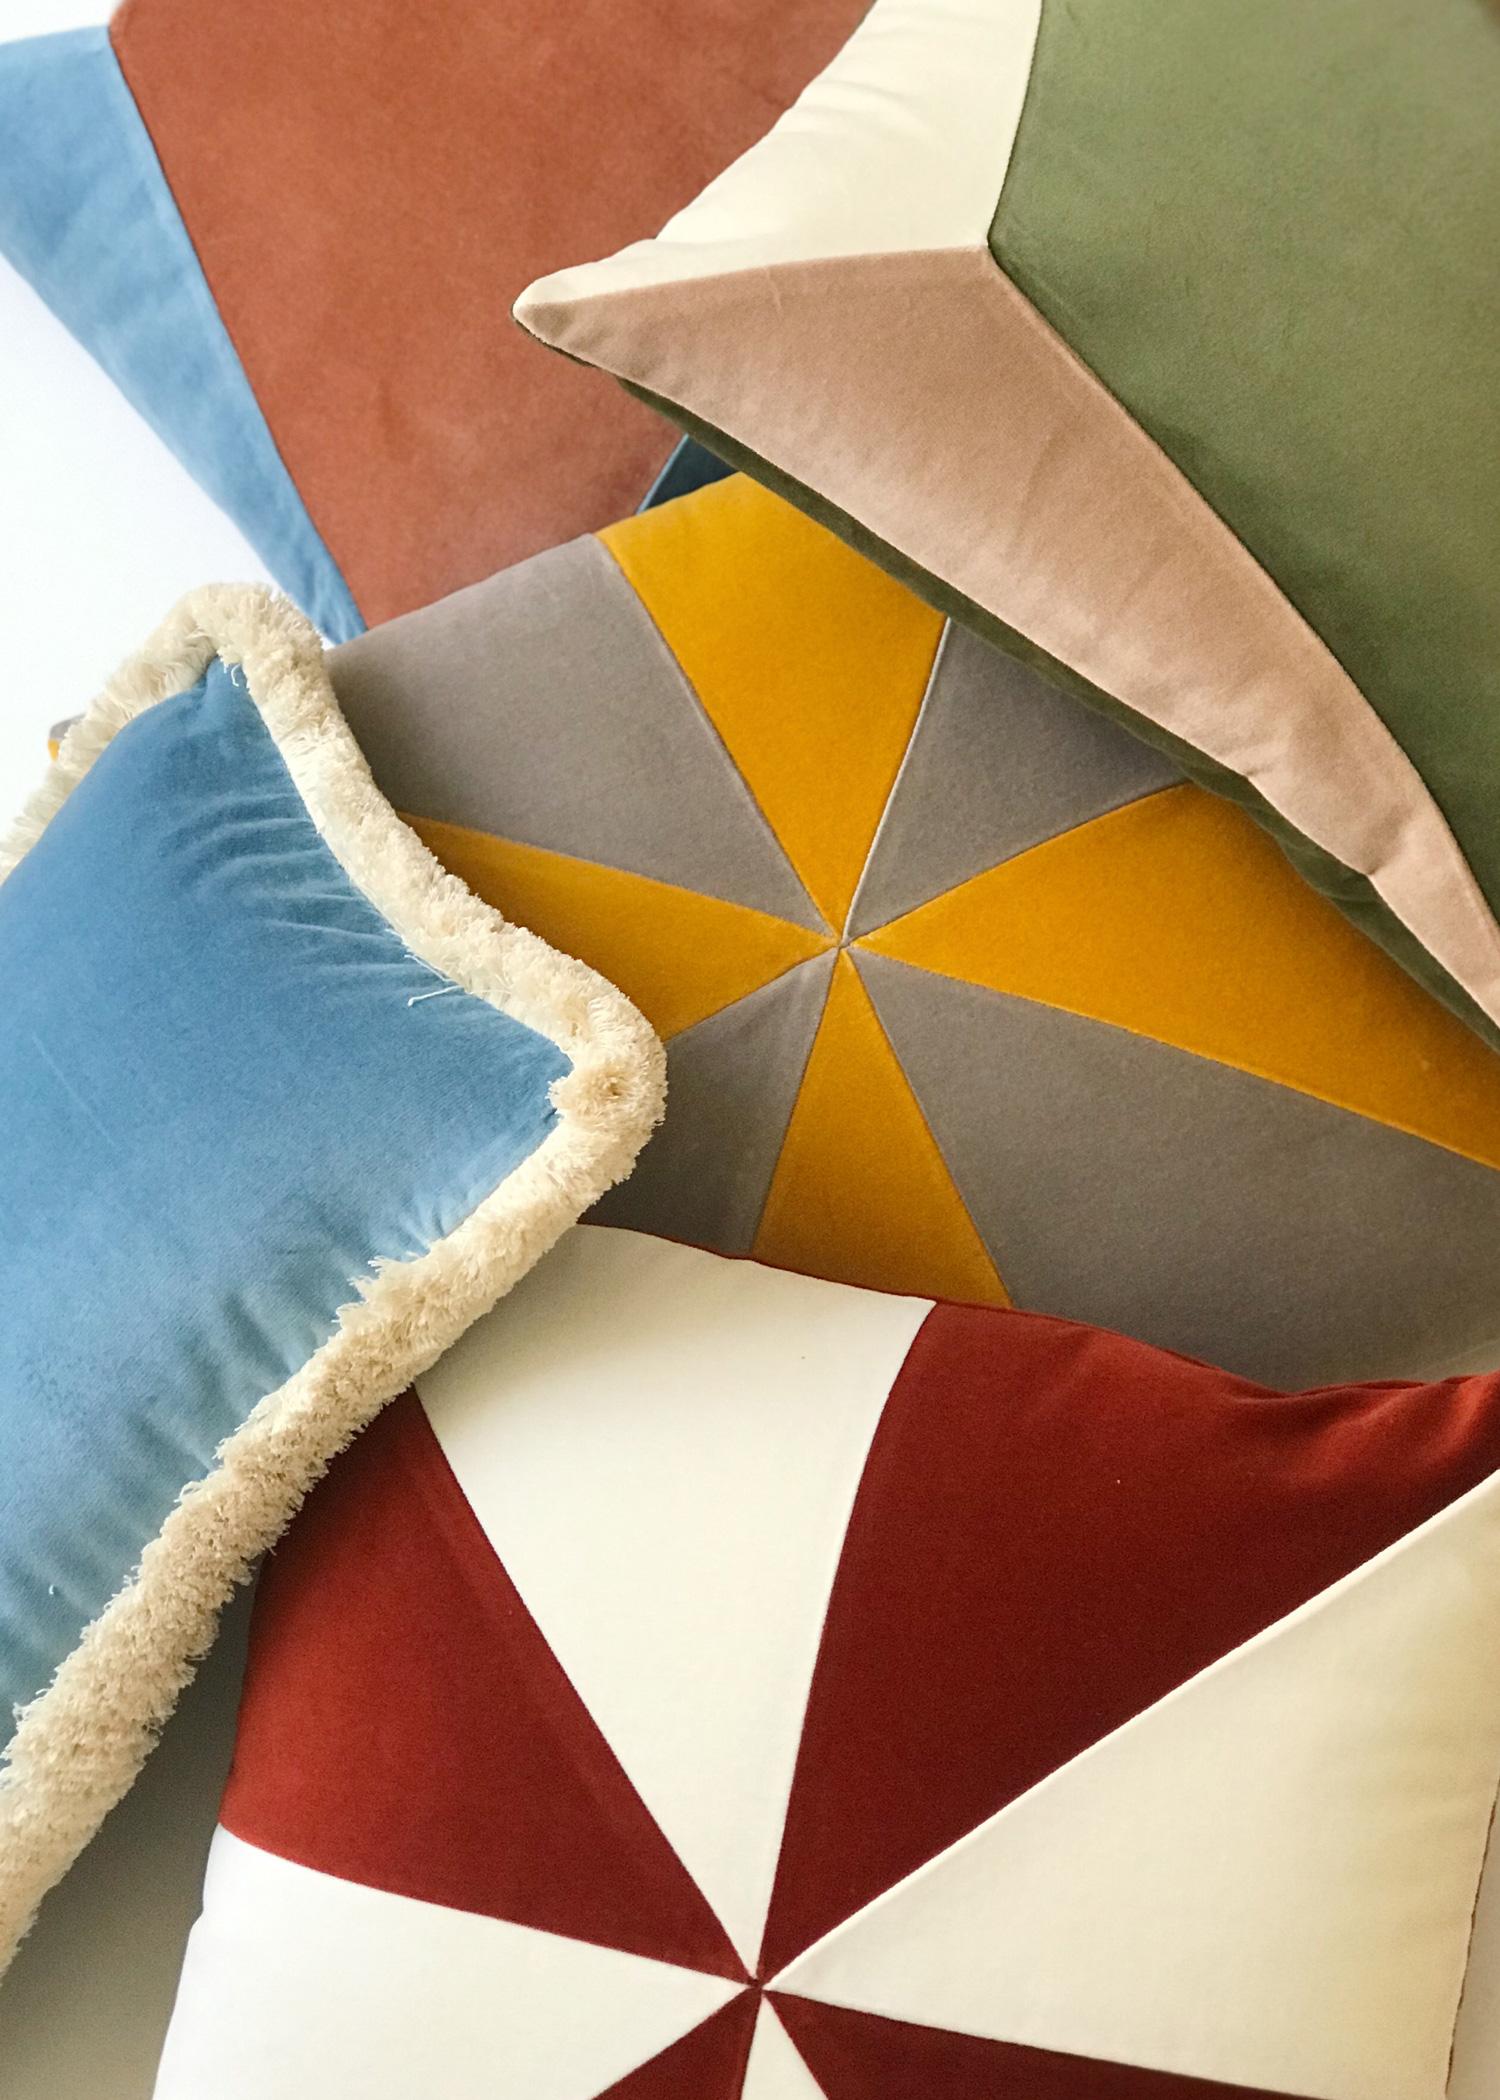 A talisman for the home of beauty, good energies and comfort. 
This decorative pillow is ethically produced by small family run business, handmade by skilled portuguese artisans with top quality cotton velvet. Each piece is unique and made